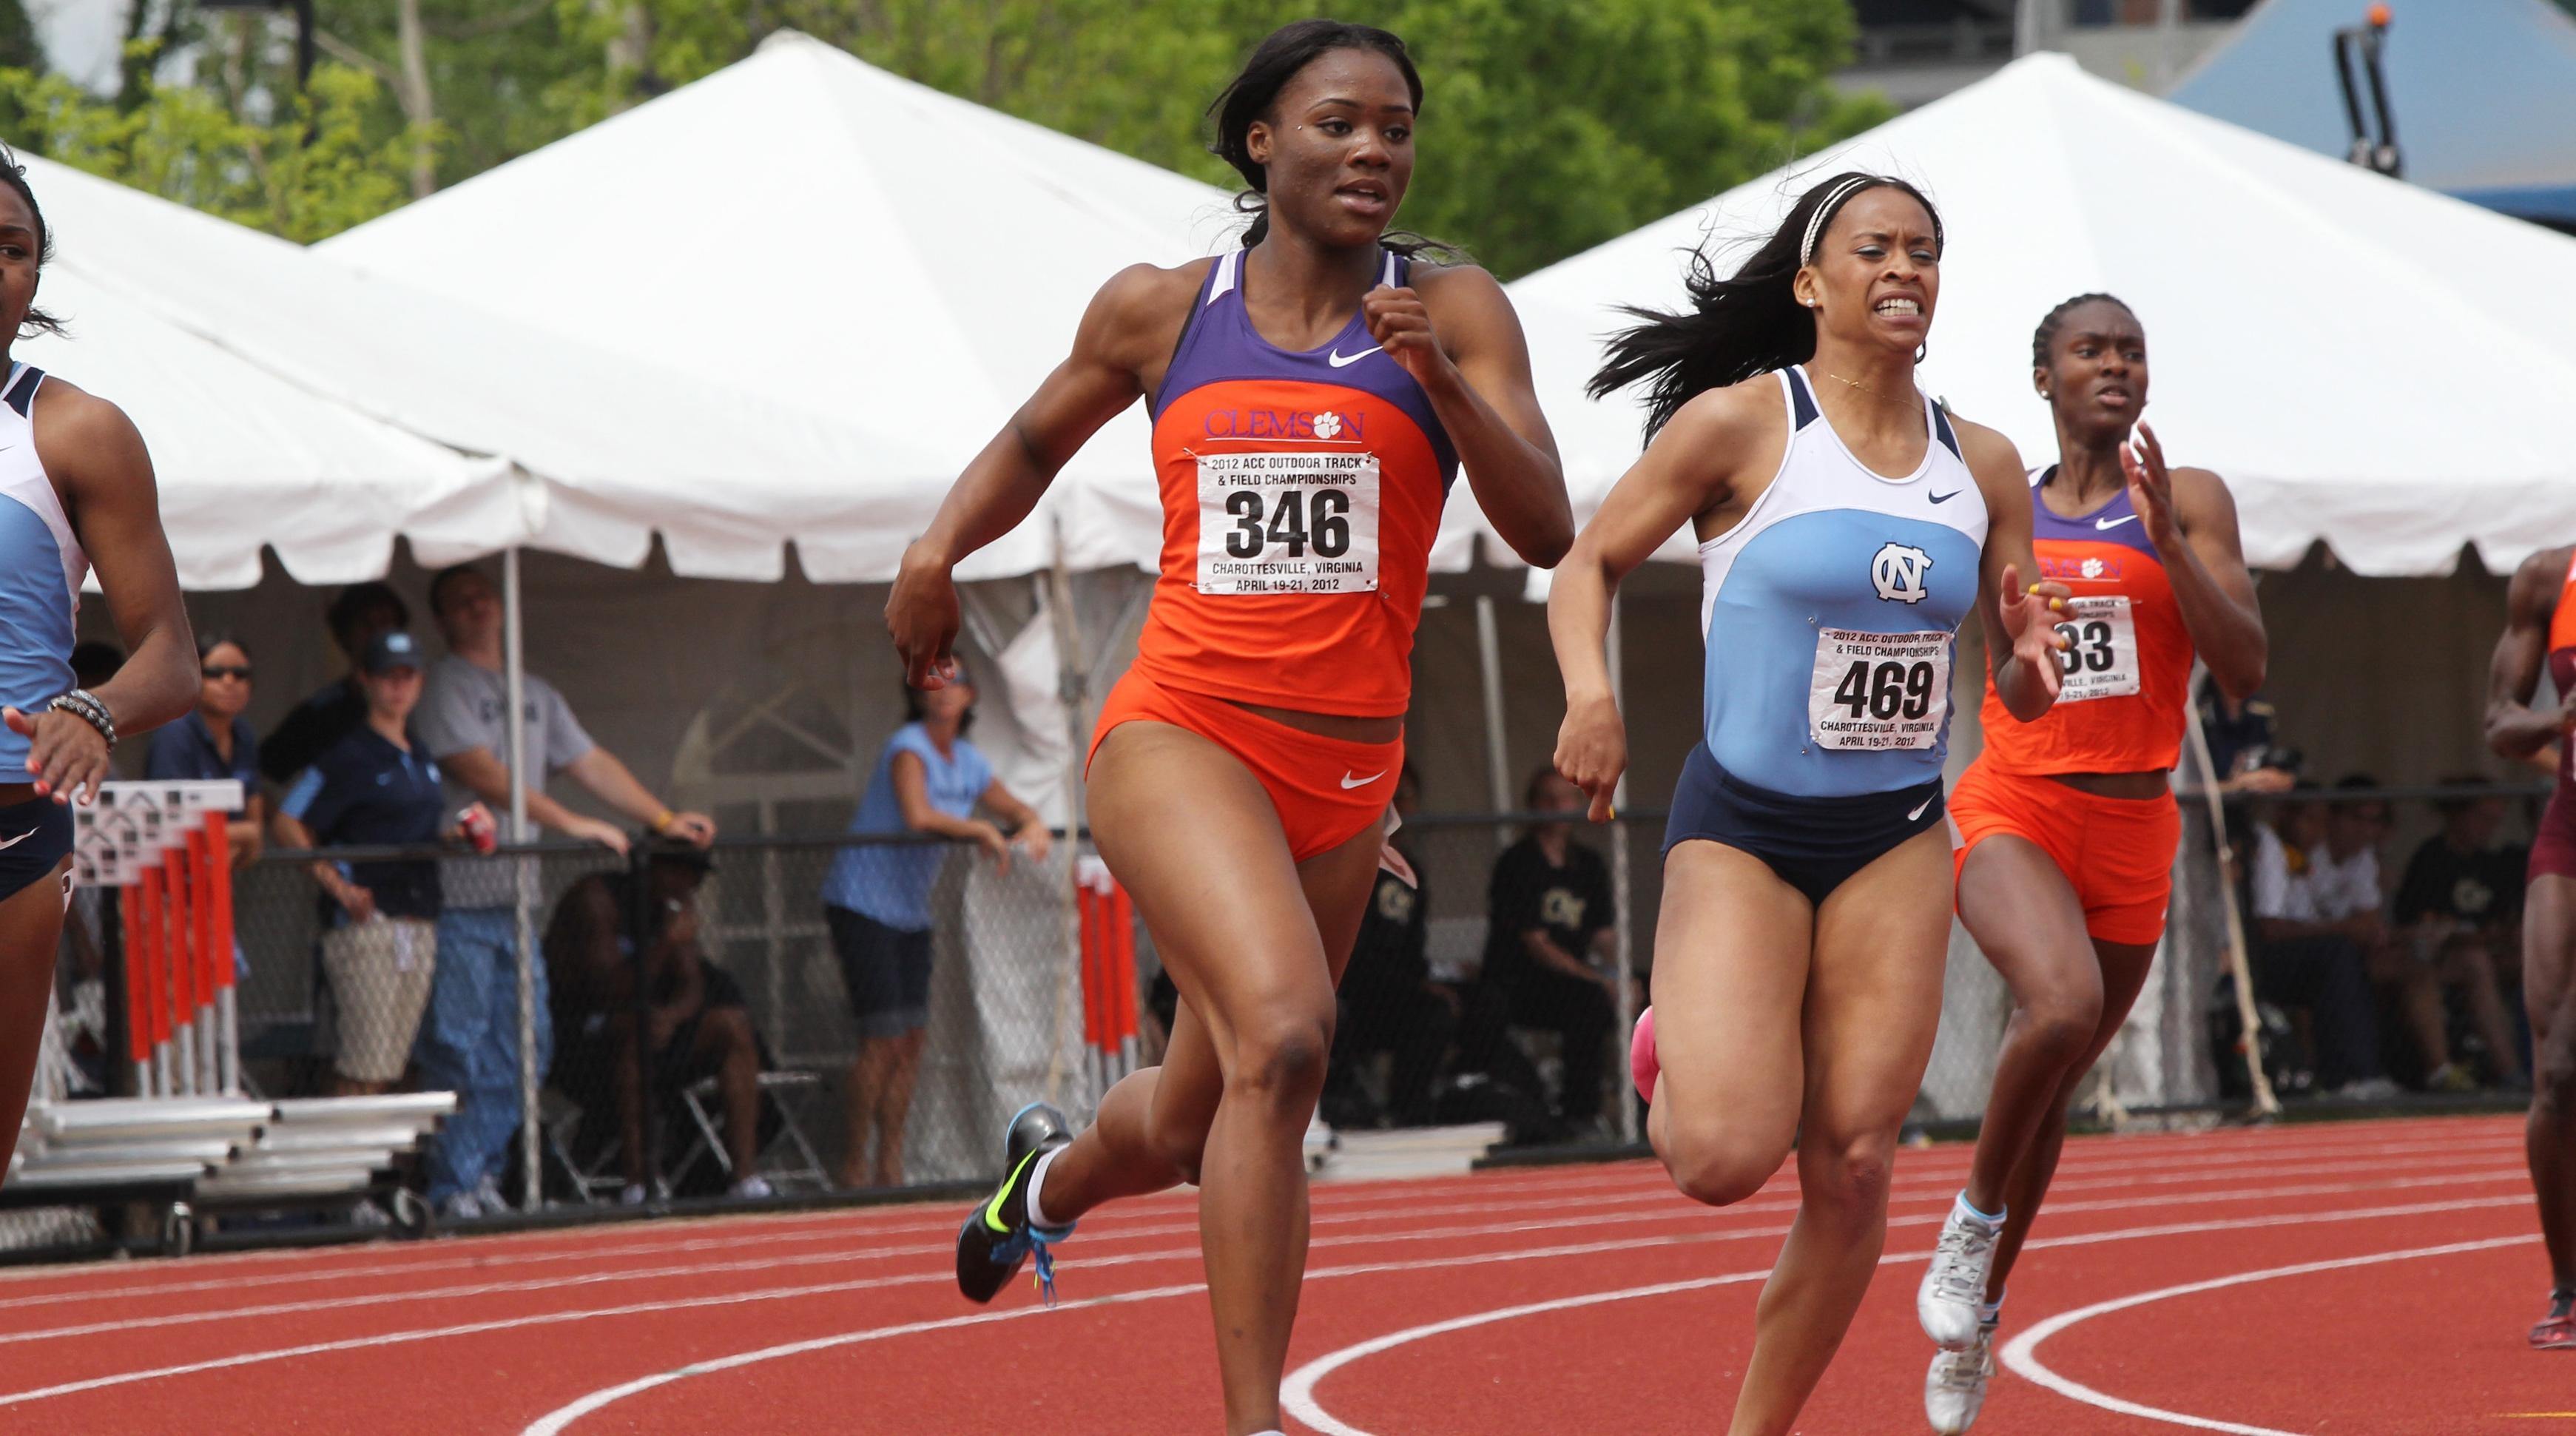 Tigers Open 2014 Outdoor Season Friday at Charlotte 49er Classic